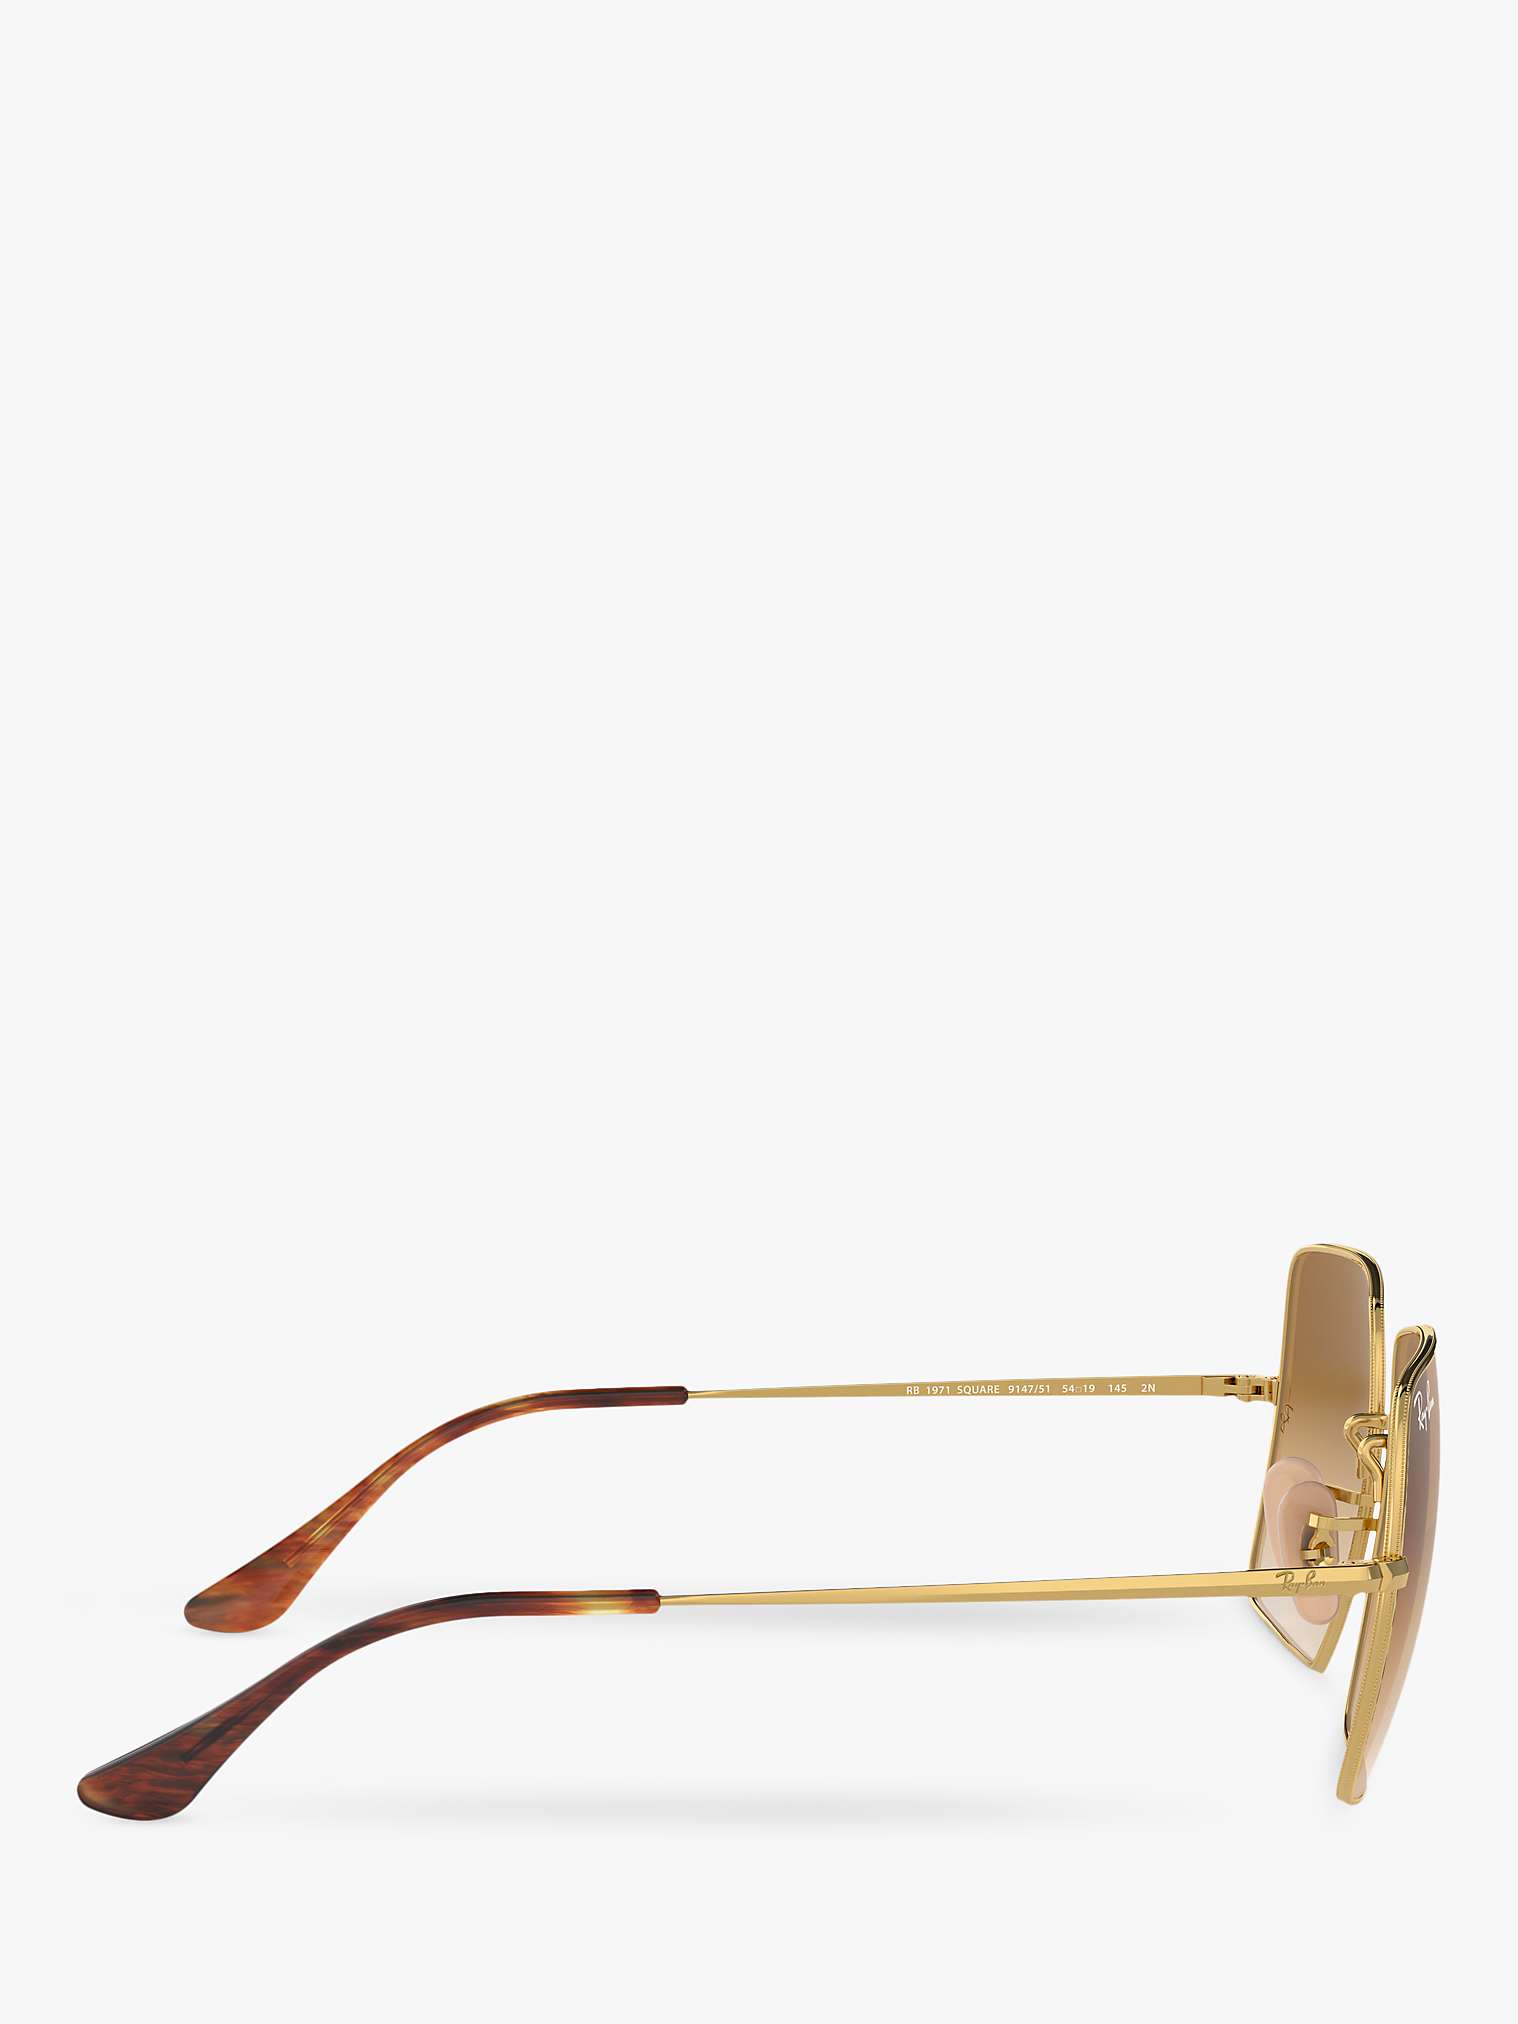 Buy Ray-Ban RB1971 Unisex Square Sunglasses, Gold/Brown Gradient Online at johnlewis.com